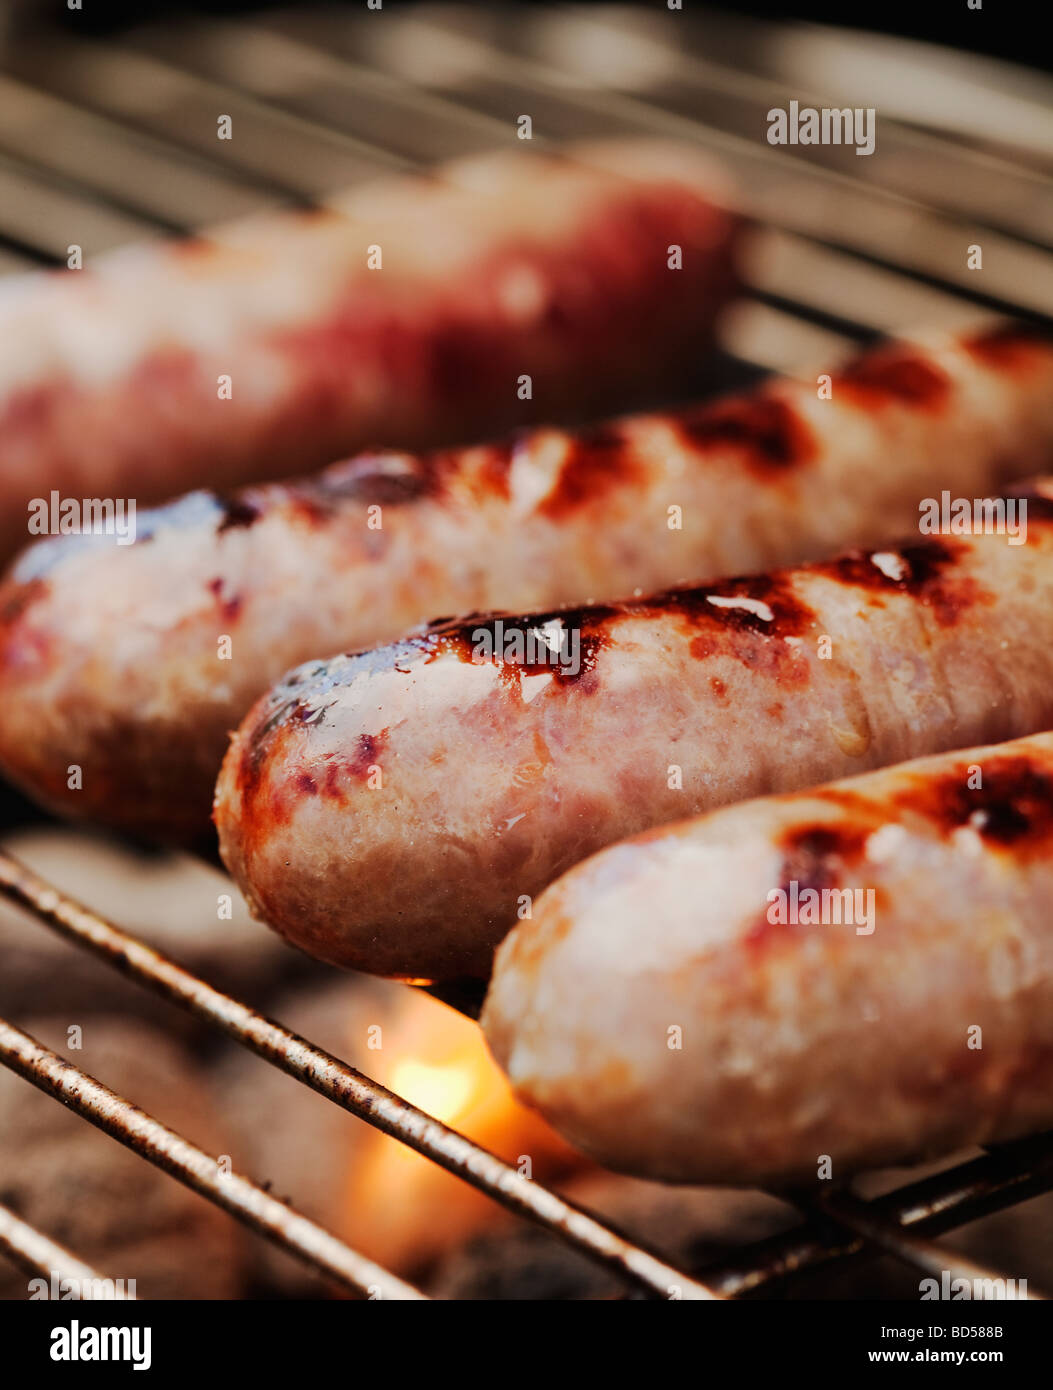 Sausages on a barbeque Stock Photo